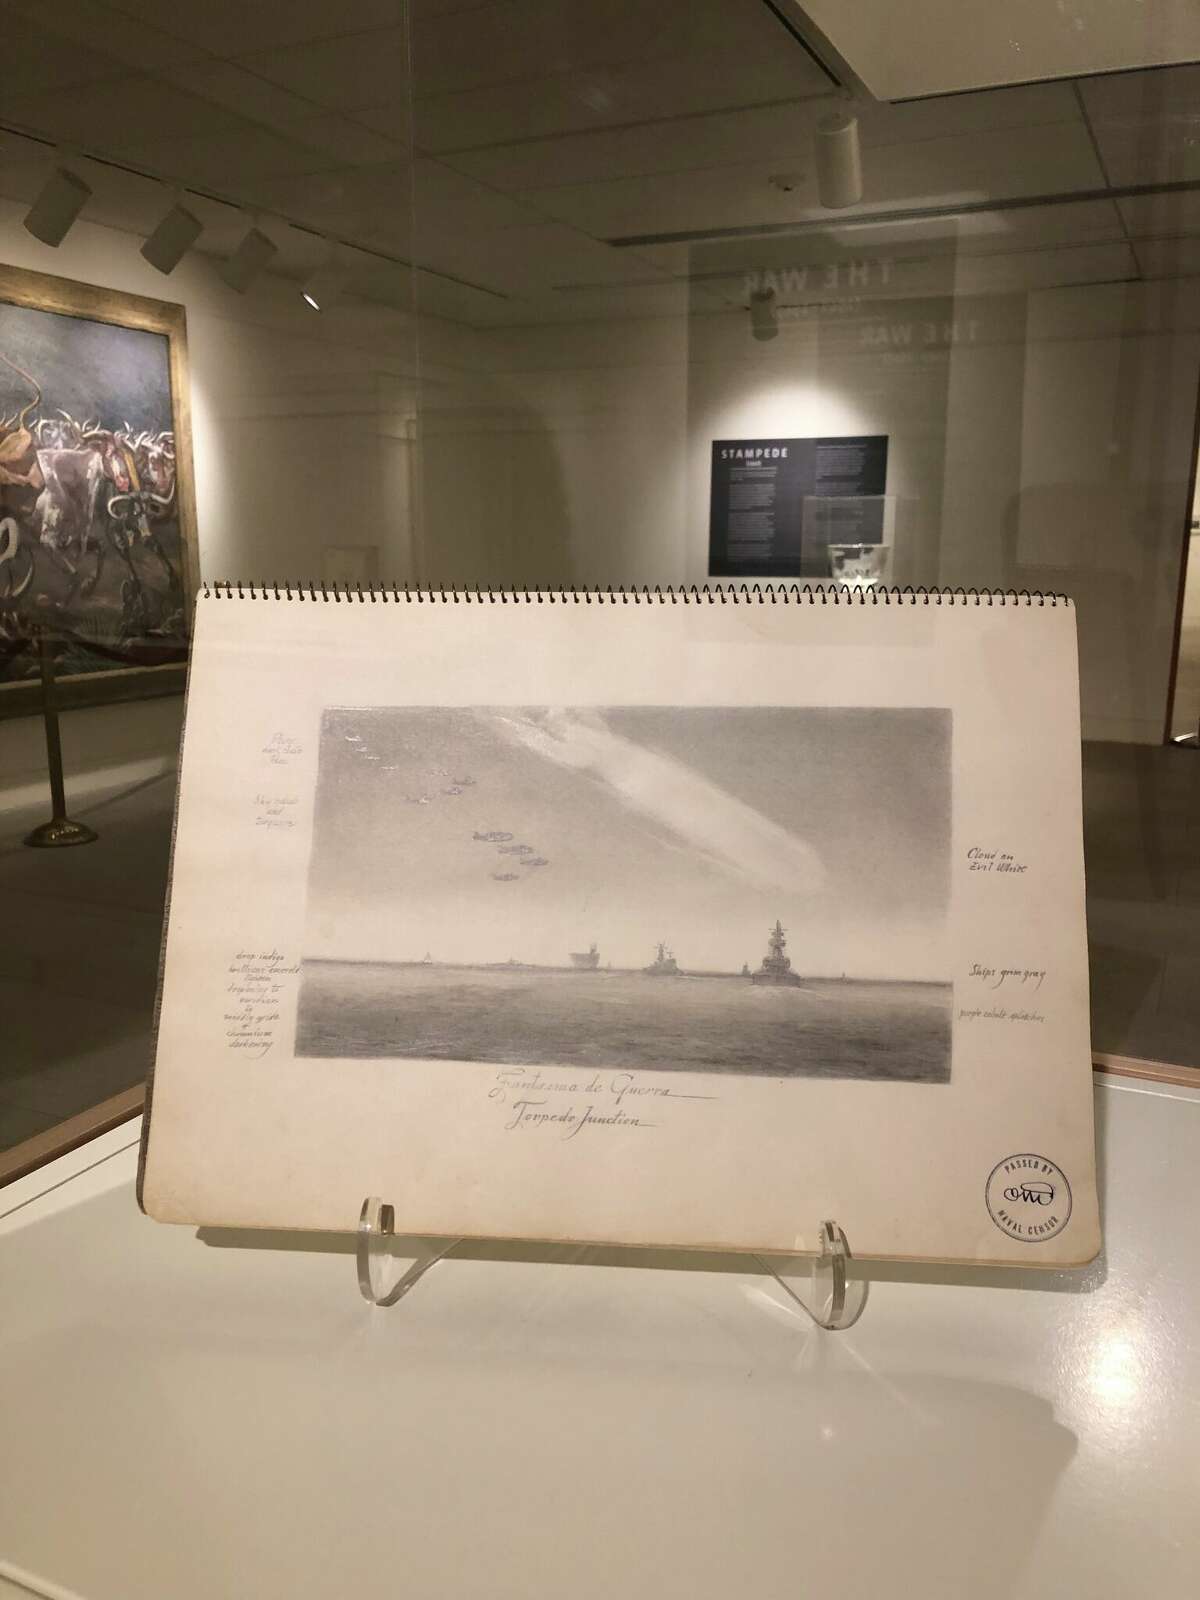 Tom Lea's sketchbook from WWII, seen at the Museum of the Southwest.